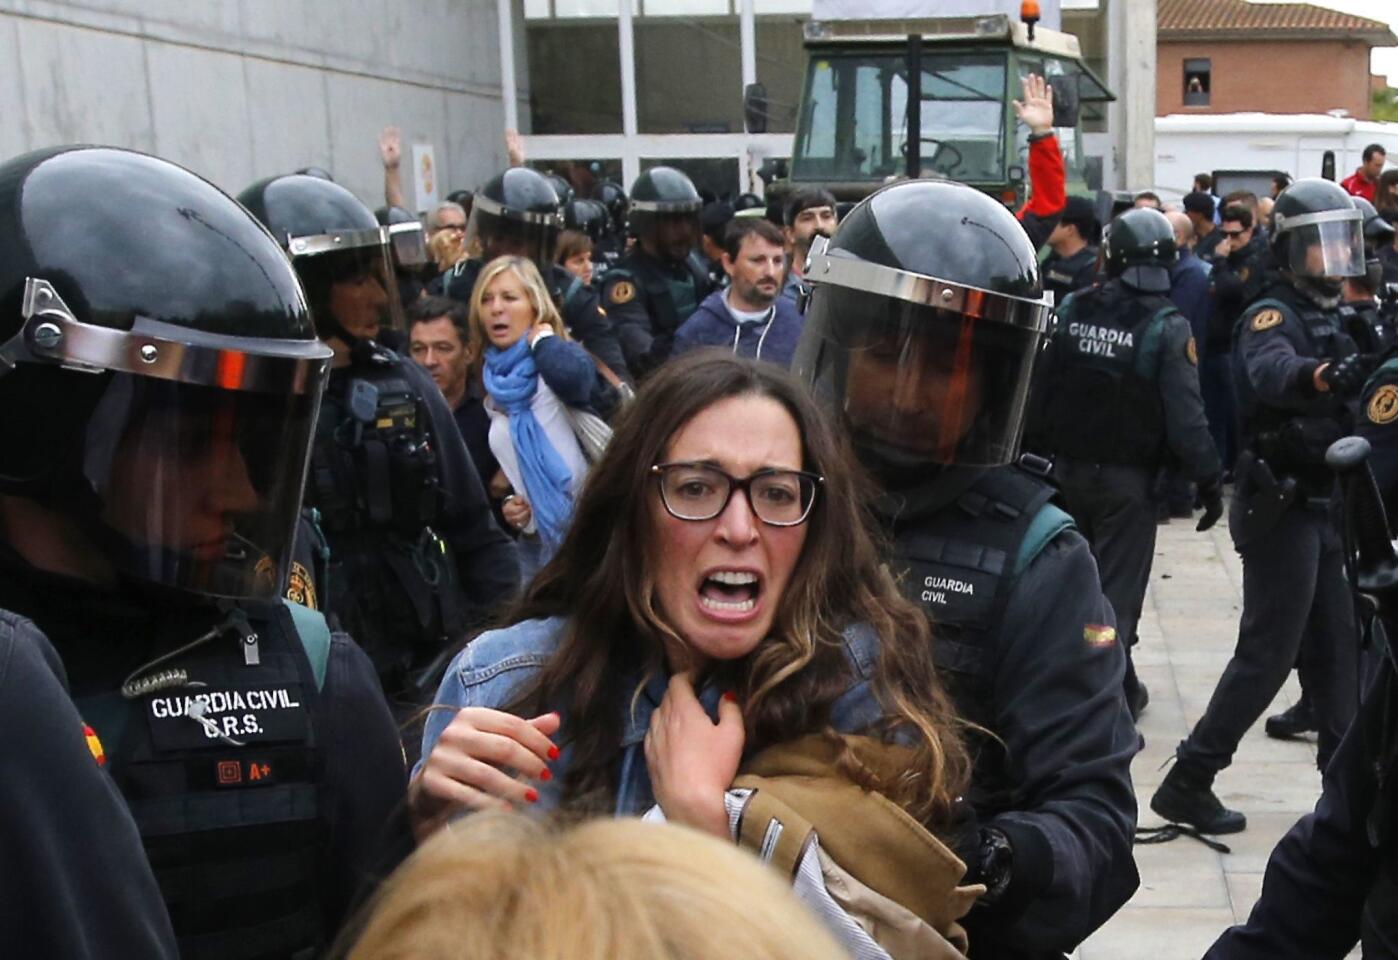 People clash with members of the Spanish Civil Guard on Sunday outside a polling station in Sant Julia de Ramis, where the Catalan president was supposed to vote in the referendum on Catalan independence.